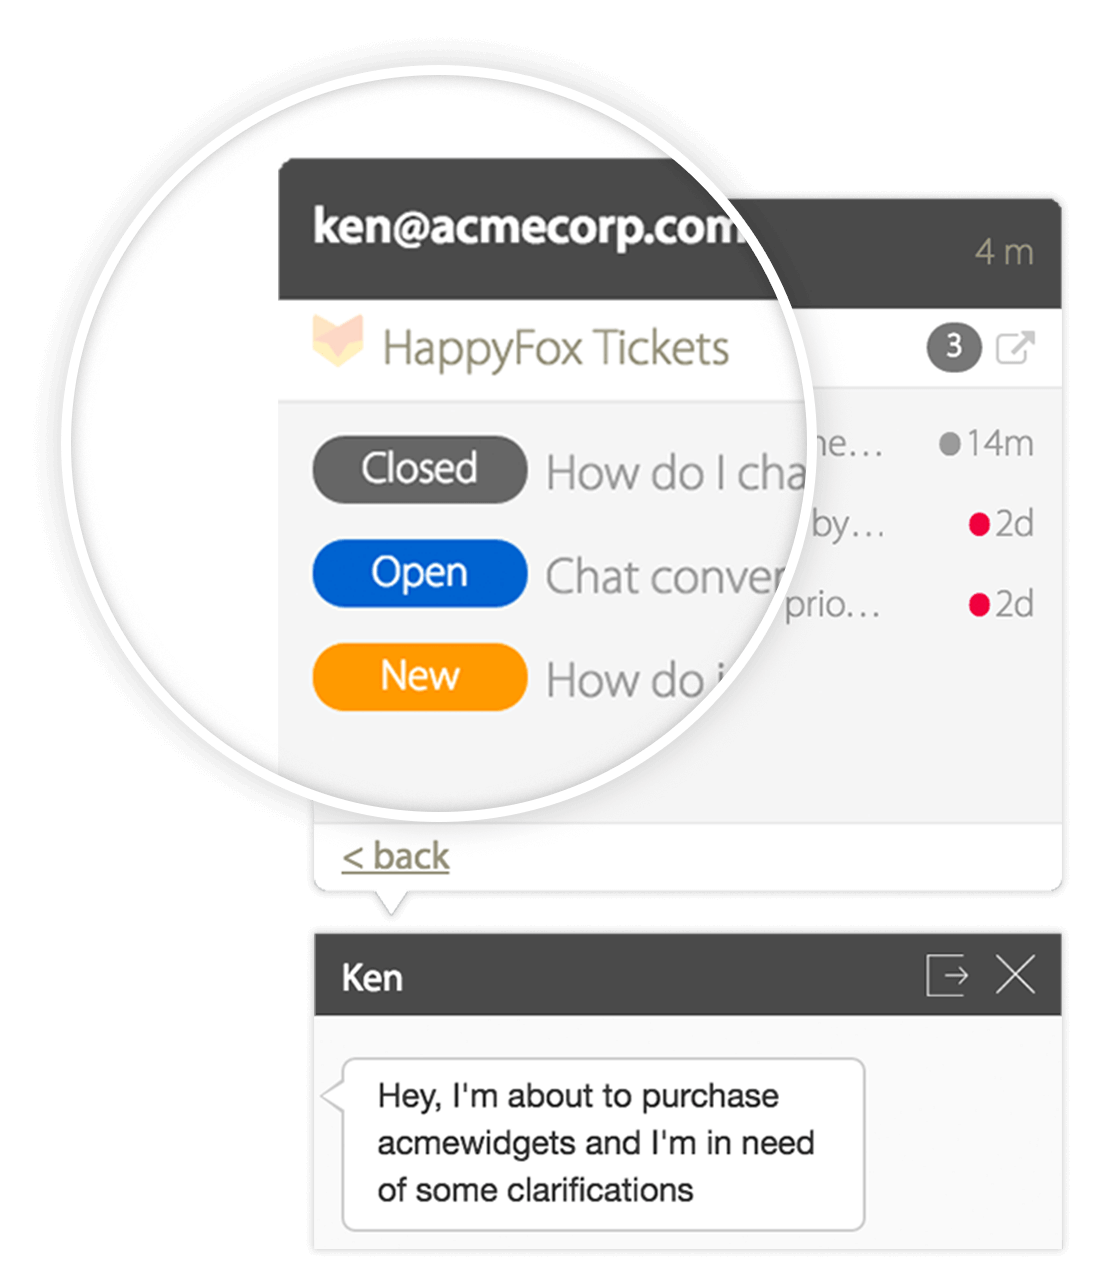 View all help desk tickets while you chat with your customer